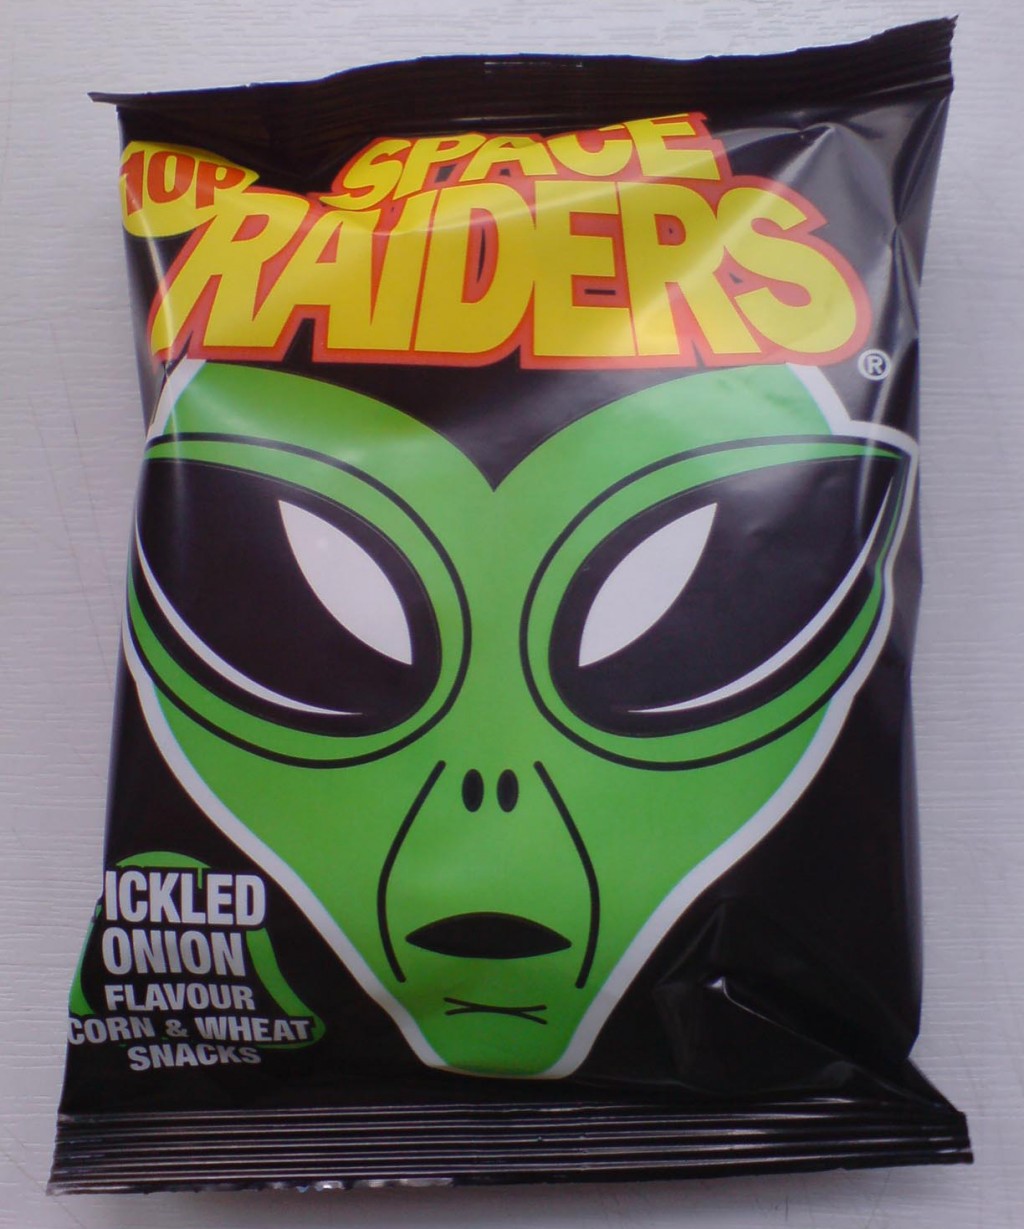 A packet of KP Space Raiders